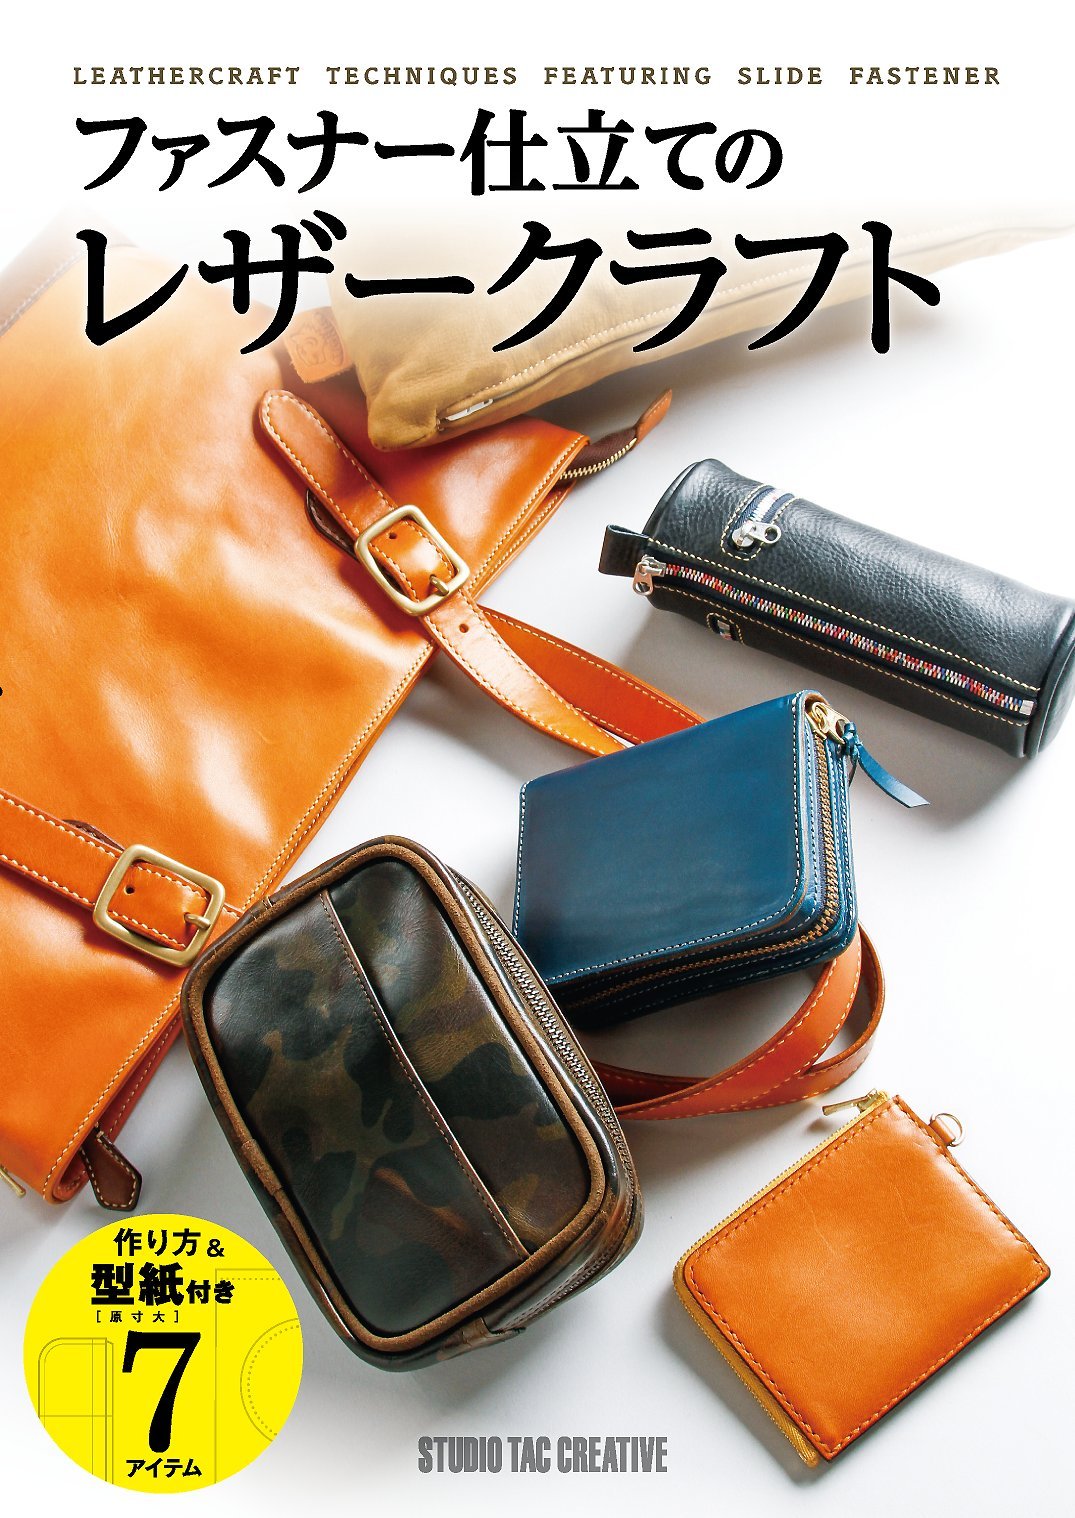 Zipper tailoring of leather craft (Step Up Series)